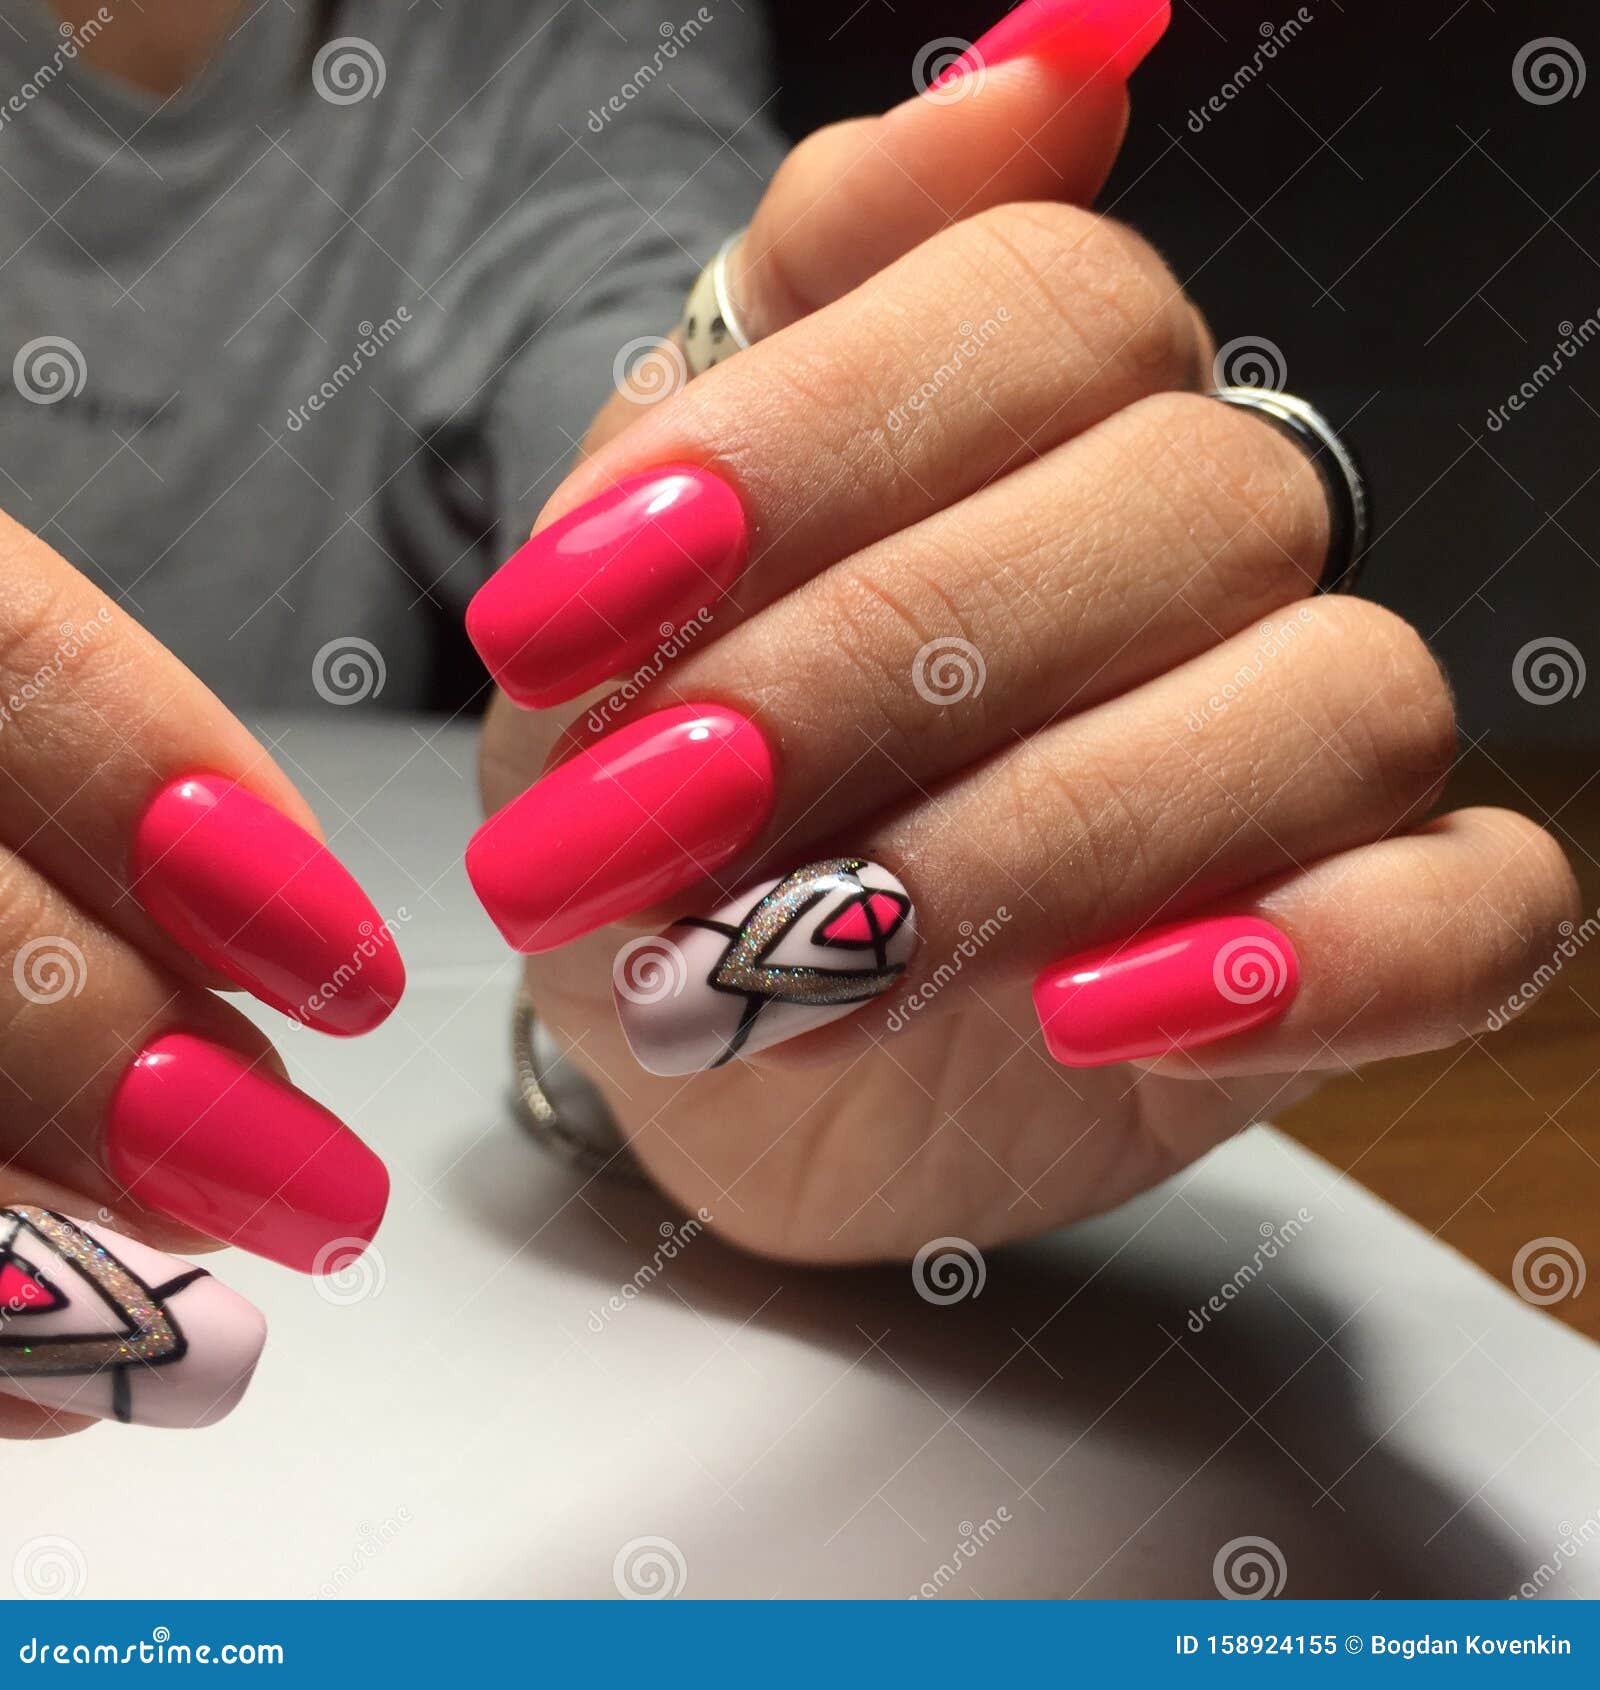 female hands with stylish red manicure on grey background